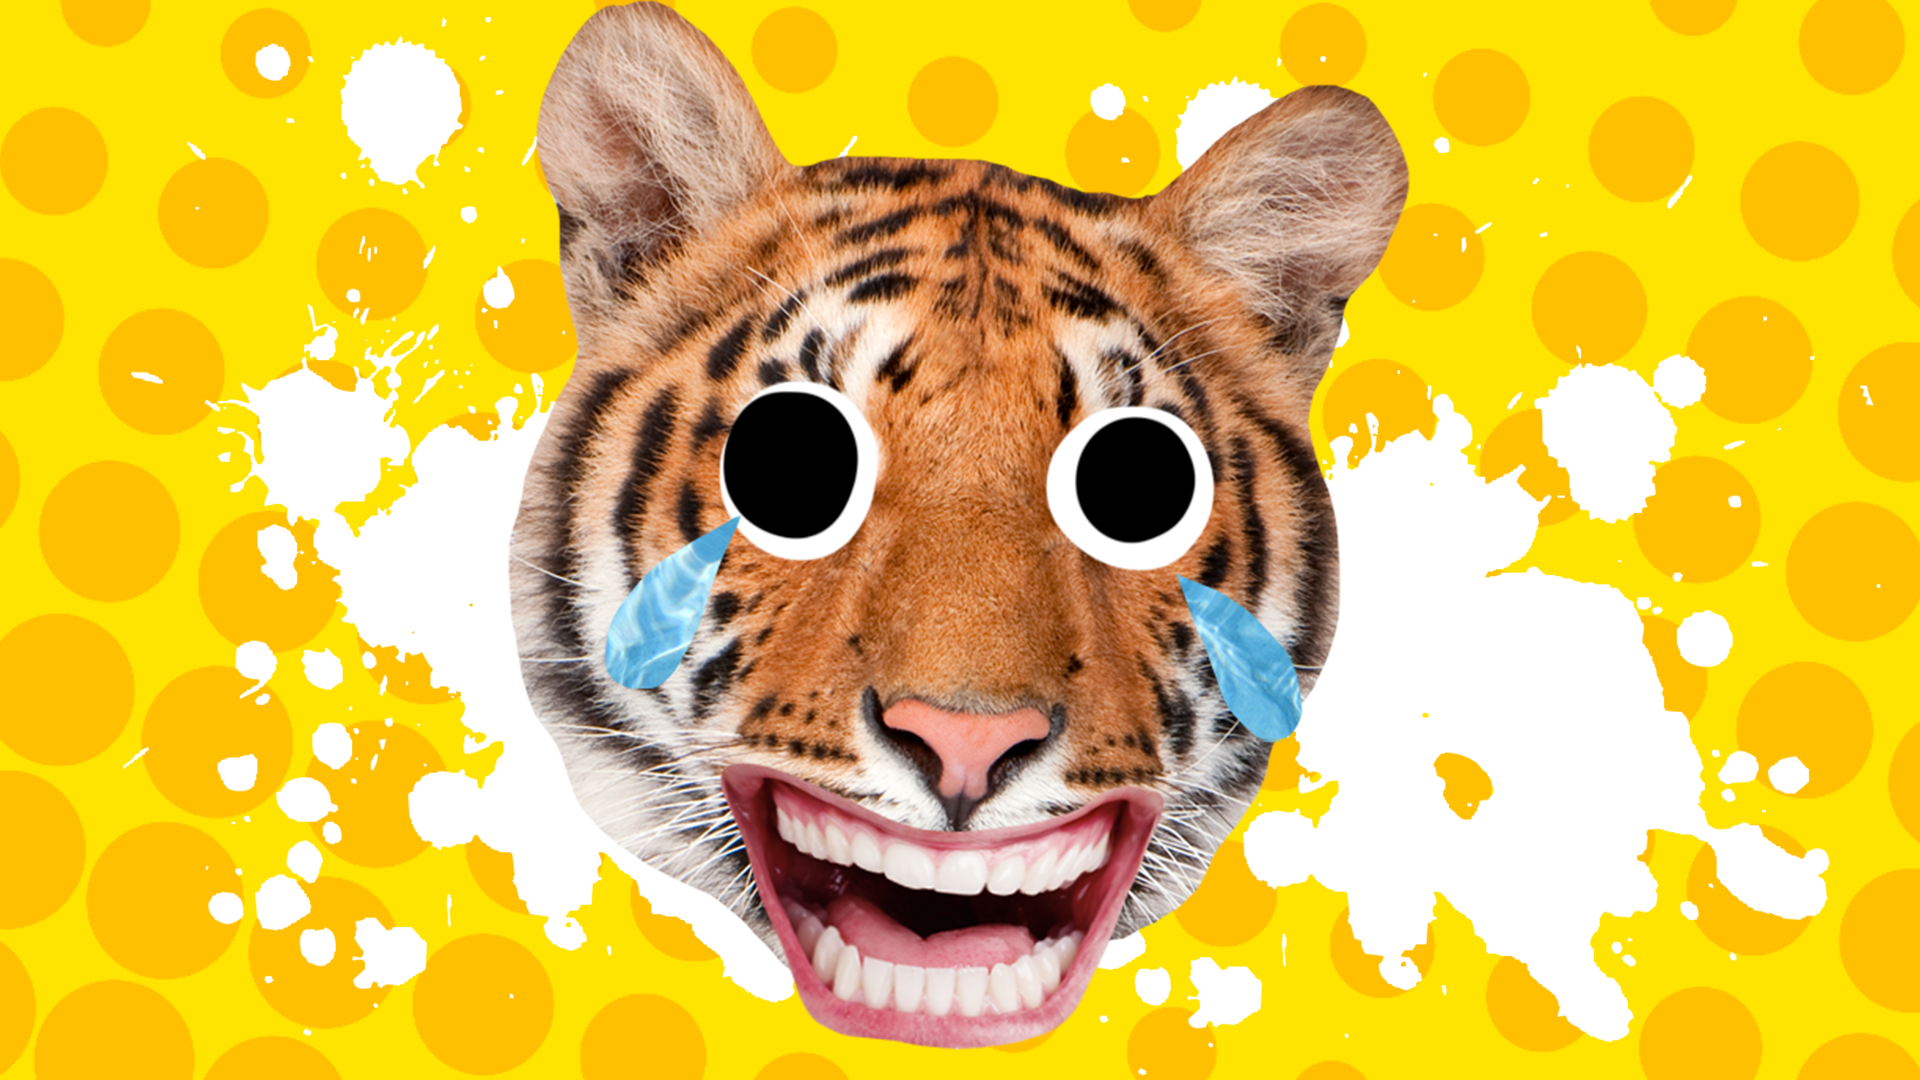 A laughing Bengal tiger in front of a yellow spotted background